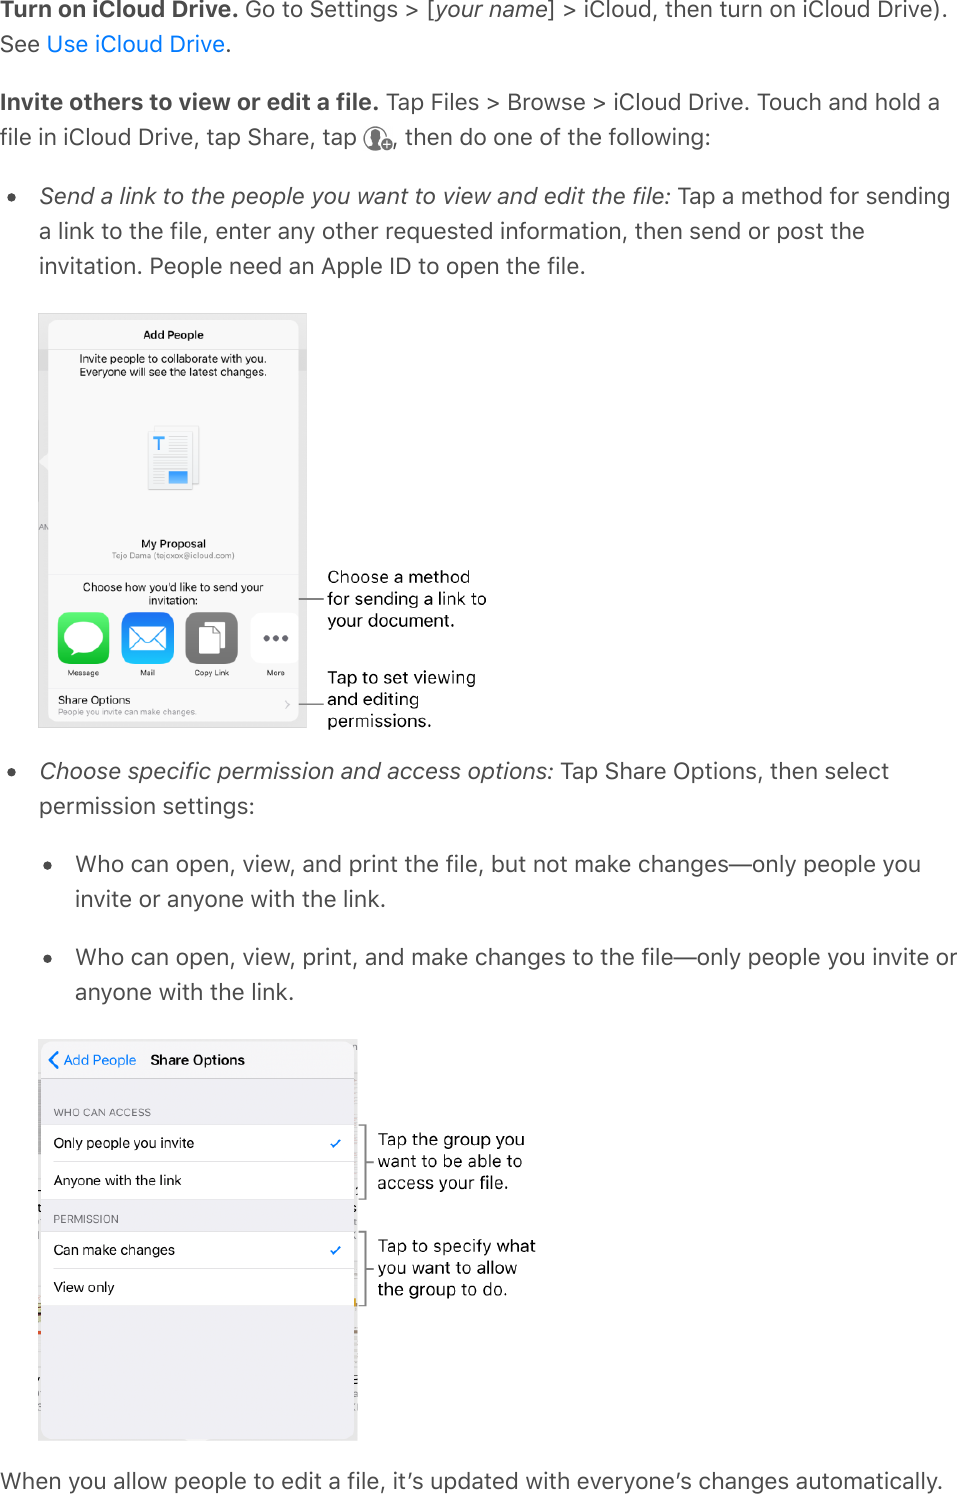 Turn on iCloud Drive. Go to Settings &gt; [your name] &gt; iCloud, then turn on iCloud Drive).See  .Invite others to view or edit a file. Tap Files &gt; Browse &gt; iCloud Drive. Touch and hold afile in iCloud Drive, tap Share, tap  , then do one of the following:Send a link to the people you want to view and edit the file: Tap a method for sendinga link to the file, enter any other requested information, then send or post theinvitation. People need an Apple ID to open the file.Choose specific permission and access options: Tap Share Options, then selectpermission settings:Who can open, view, and print the file, but not make changes—only people youinvite or anyone with the link.Who can open, view, print, and make changes to the file—only people you invite oranyone with the link.When you allow people to edit a file, itʼs updated with everyoneʼs changes automatically.Use iCloud Drive